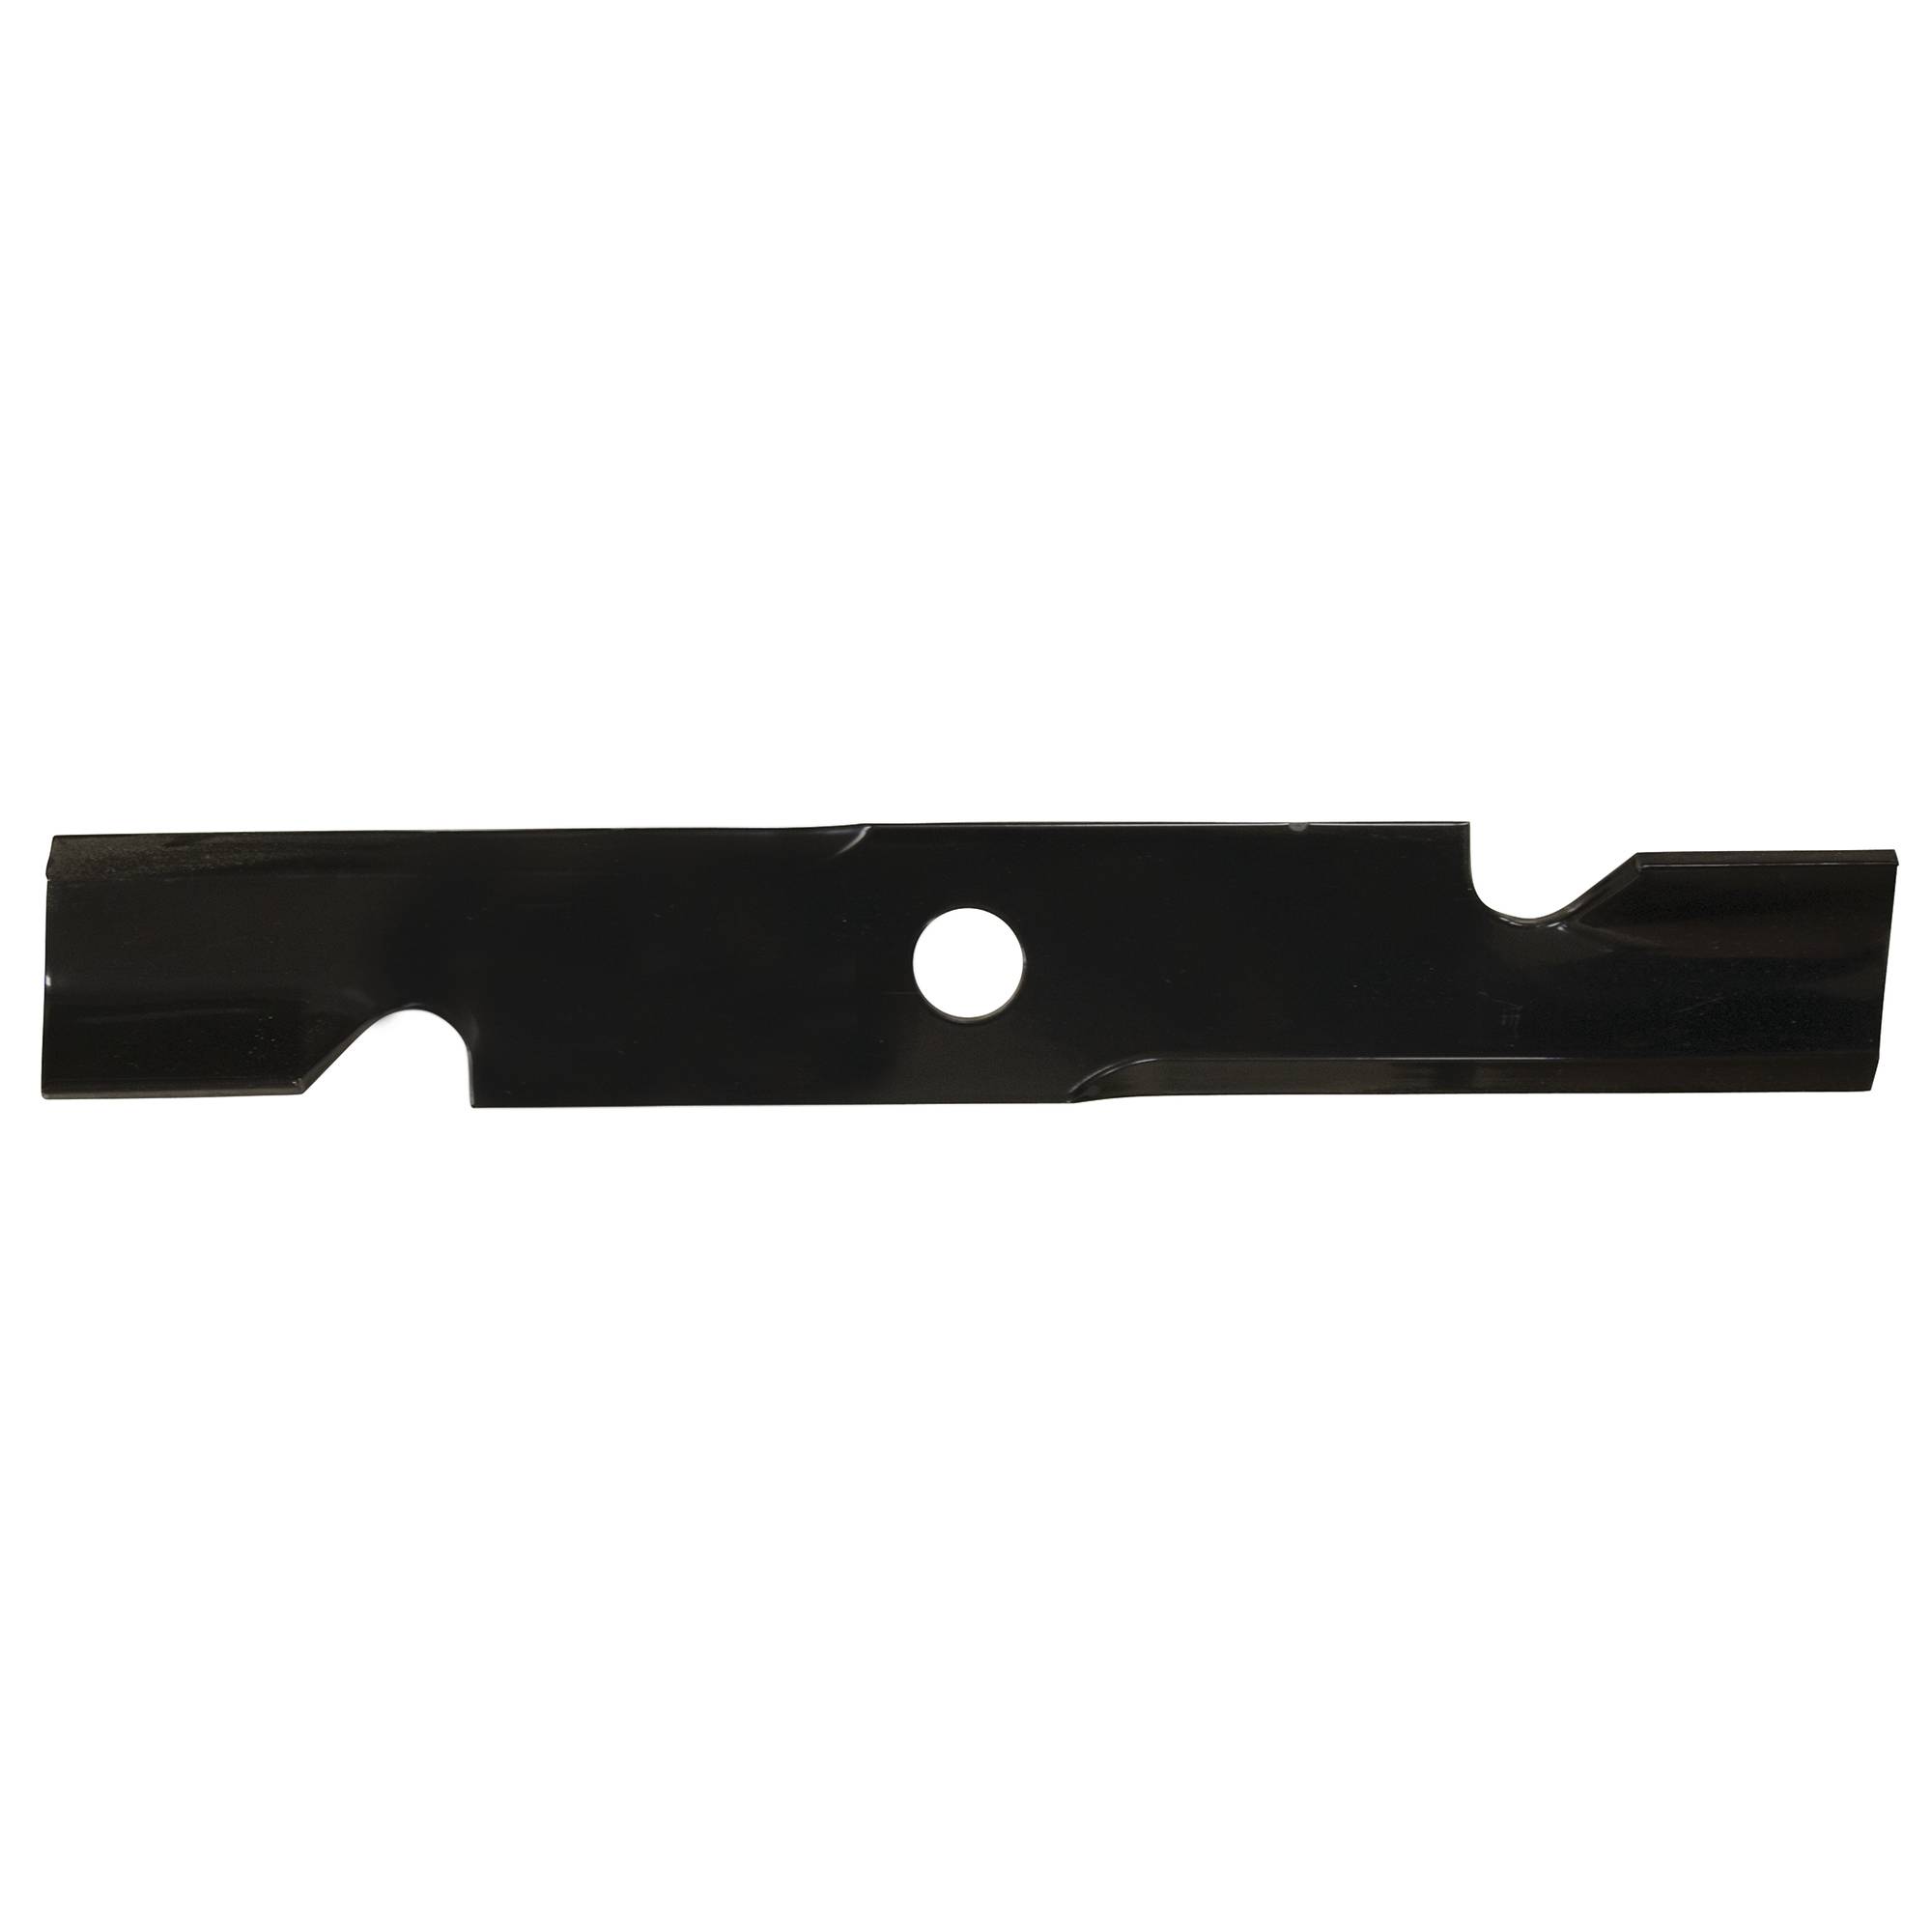 New Stens Notched Air-Lift Blade 355-335 for Exmark 103-6401-S - image 2 of 4